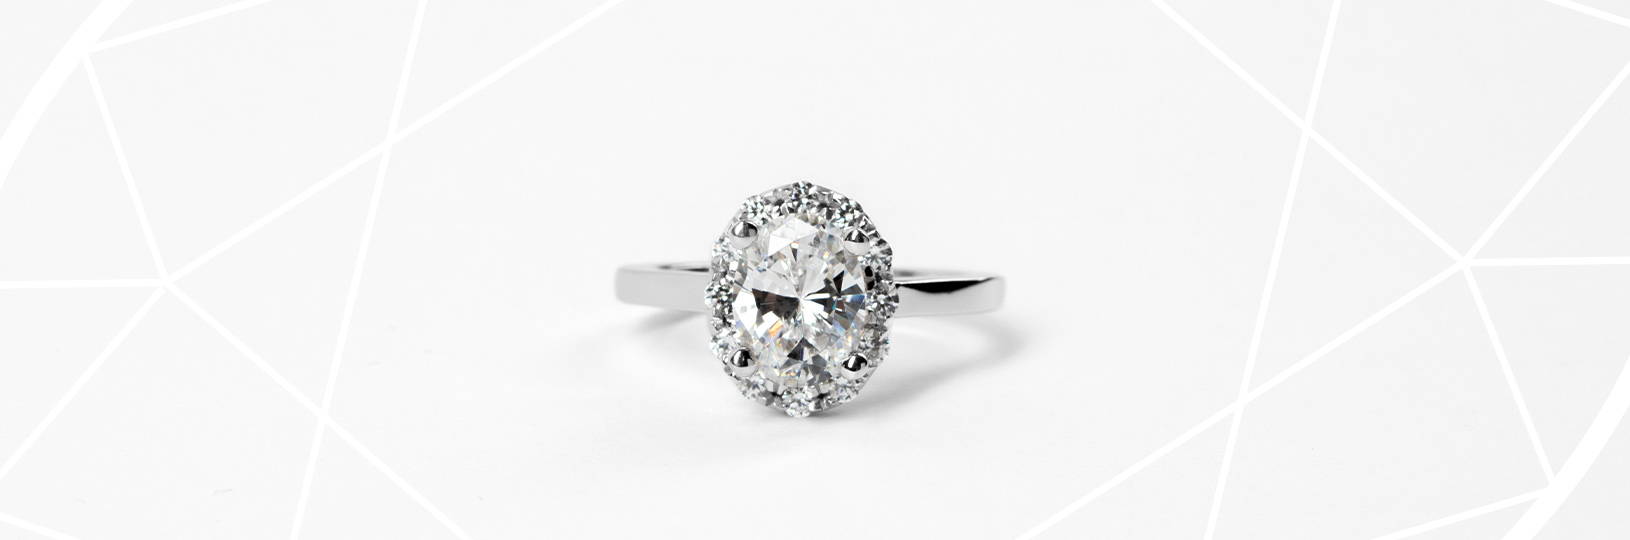 An engagement ring featuring an oval cut stone